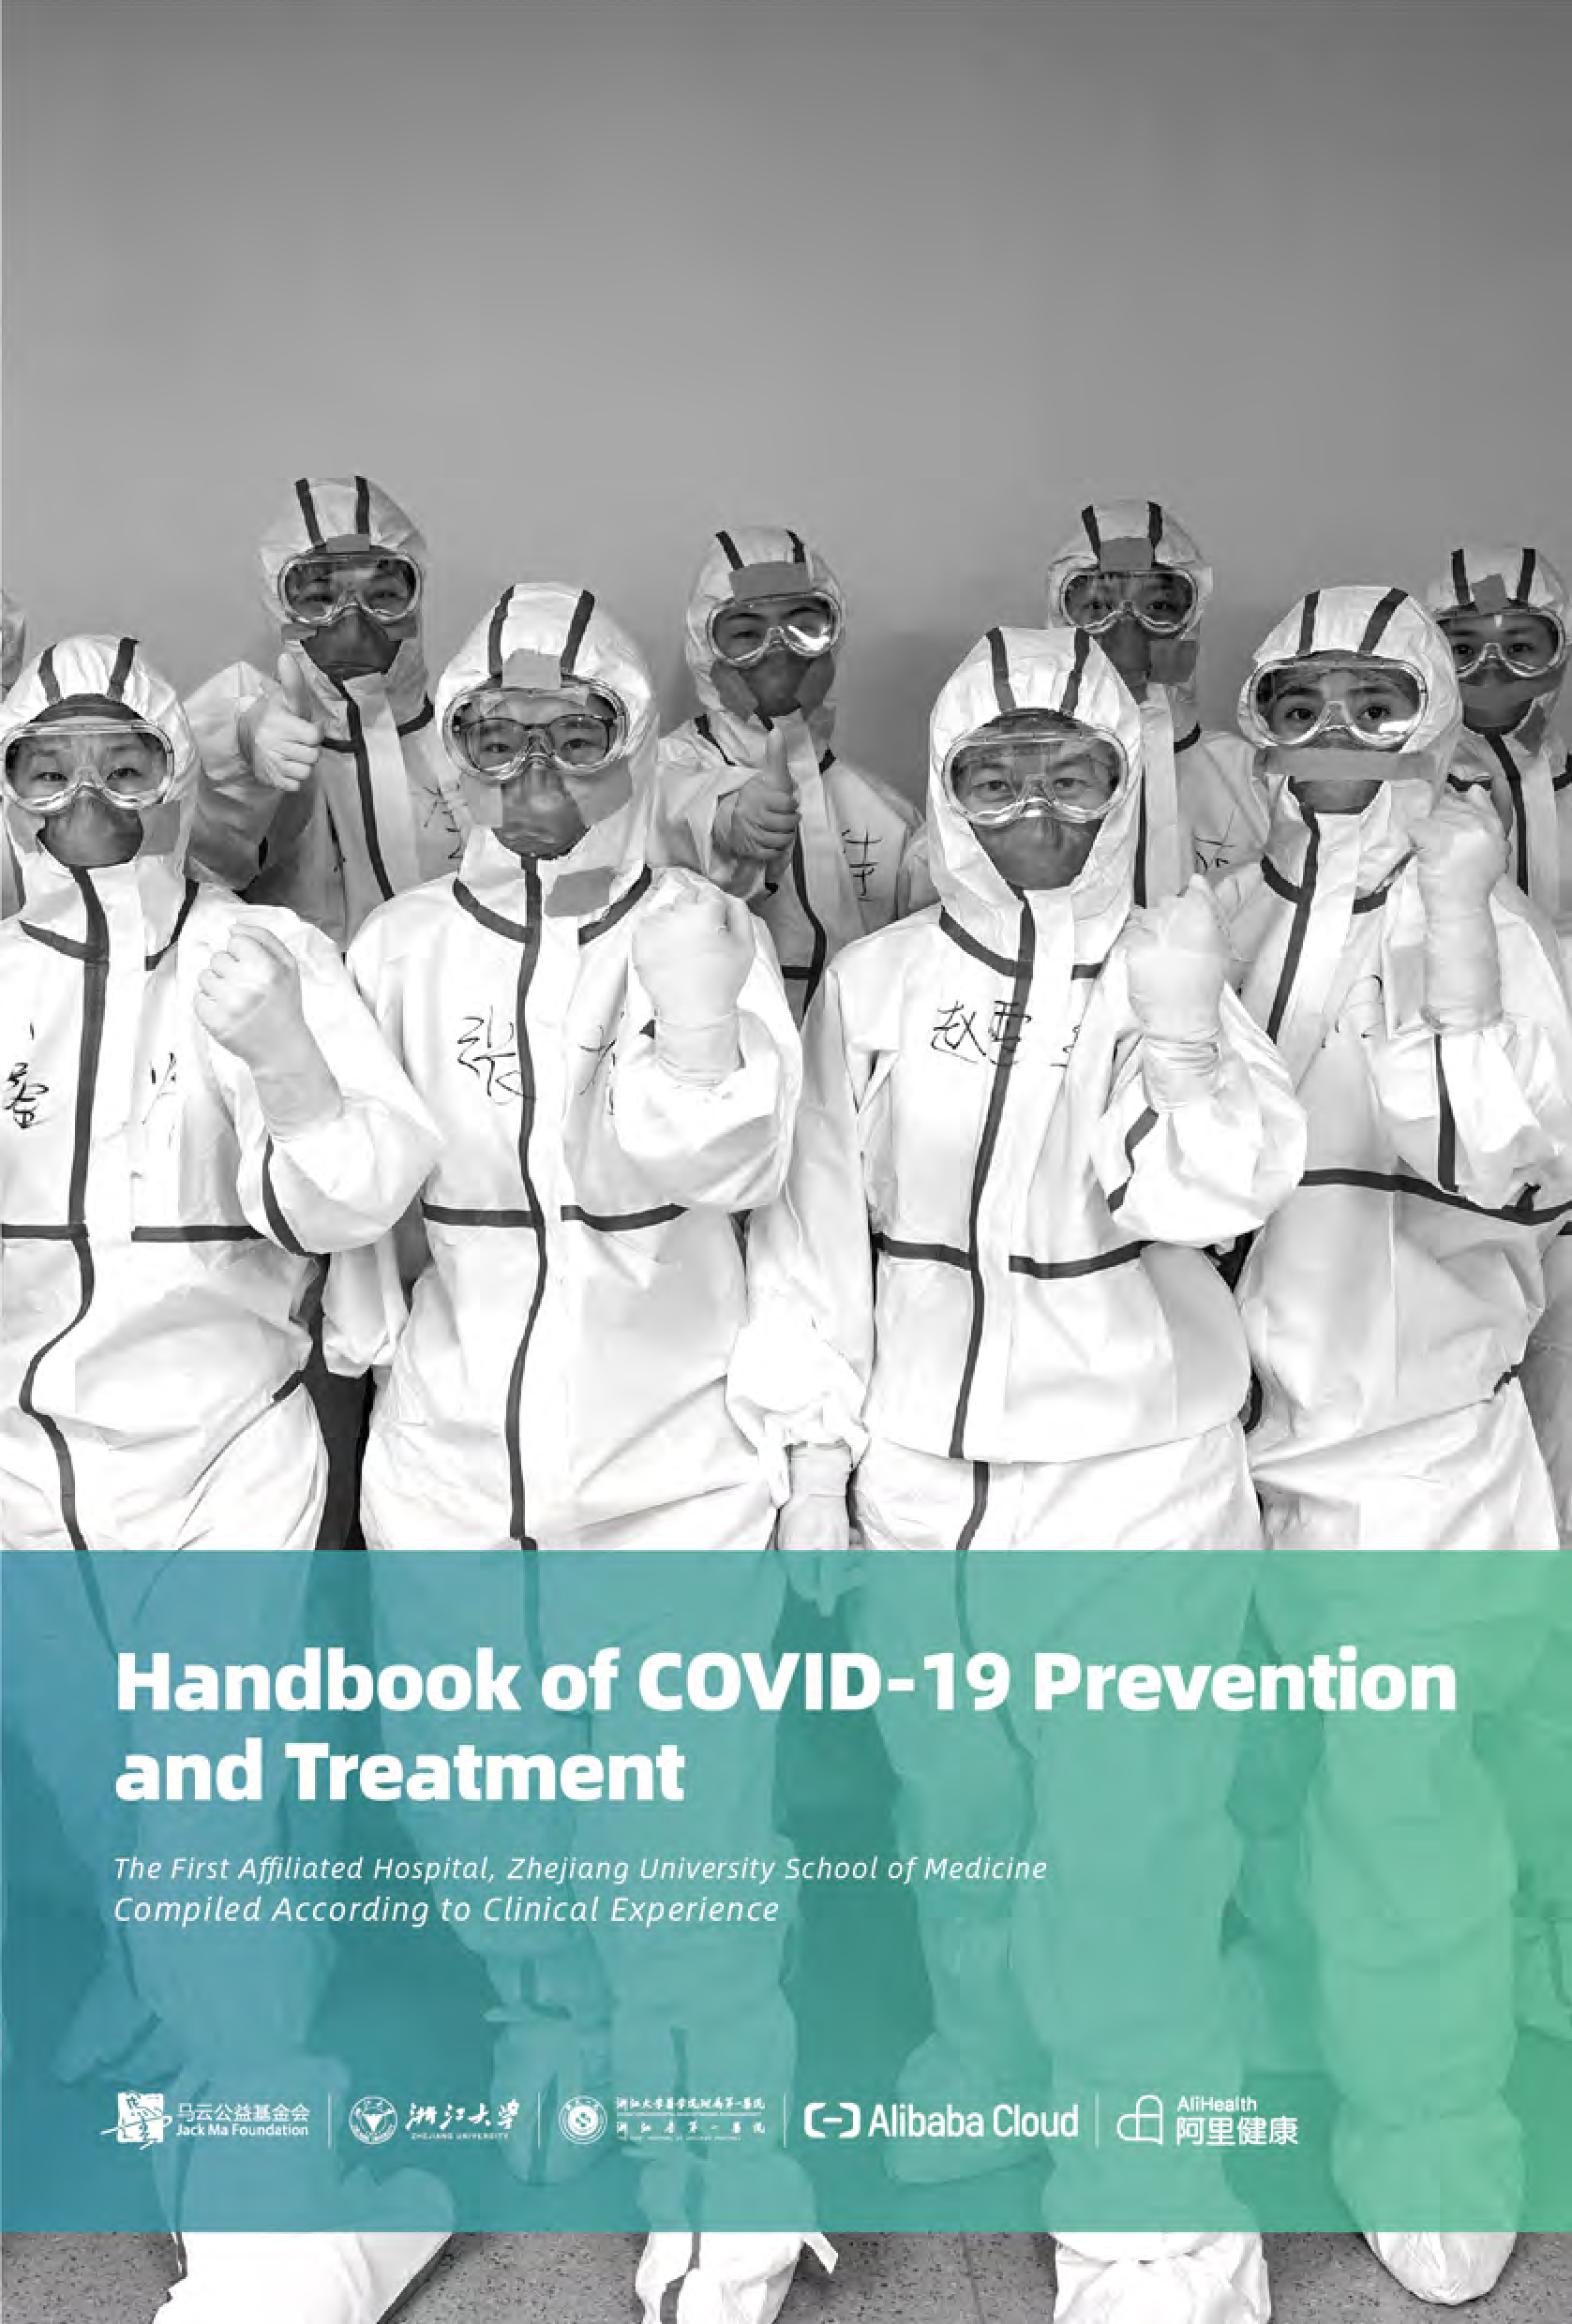 Handbook of COVID-19 Prevention and Treatment (EN) 模板